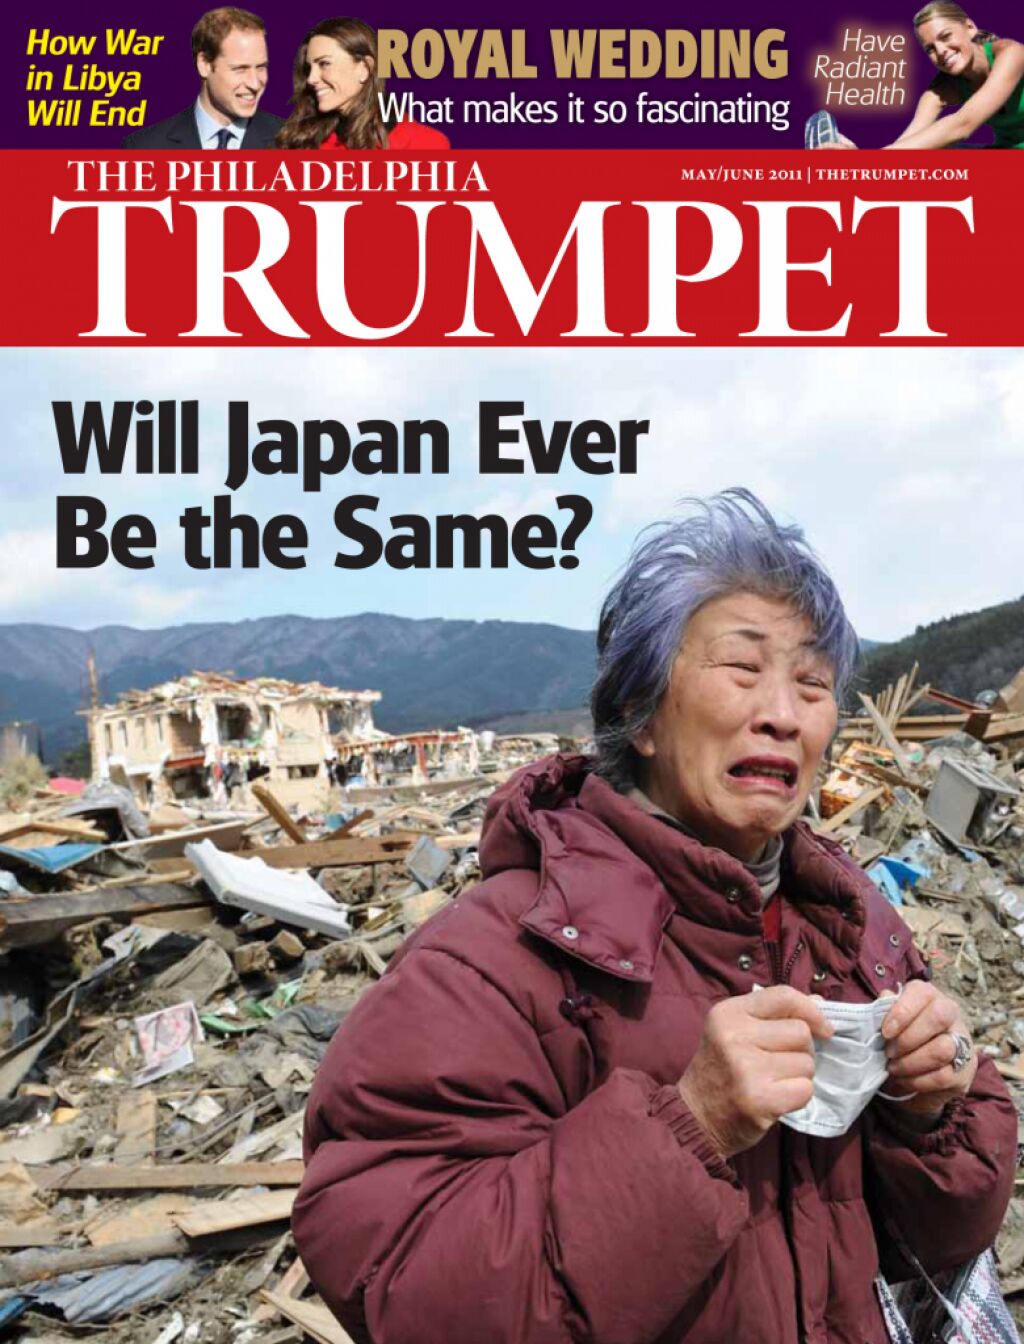 Will Japan Ever Be the Same? | theTrumpet.com